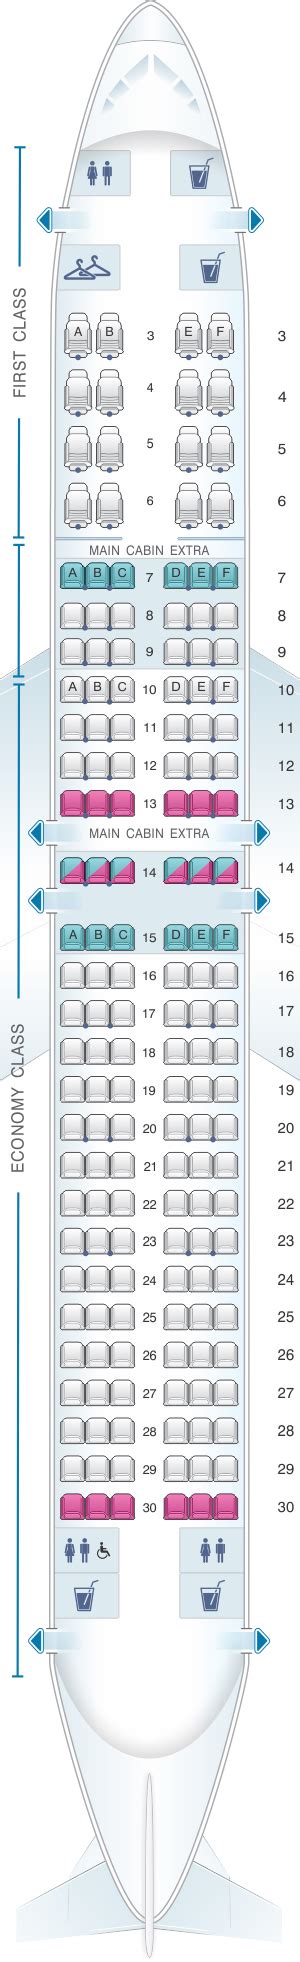 American airlines seat map 737-800. flight AA 408 out of DFW (6/30/2021)on a 737-800 Oasis version was less than average. there was no IFE, poor recline, seat cushion was rather thin, leg room just ok for a 6.0' guy, service was fair (drink and cookie), but overall bearable for a 3.0 hour flight. 